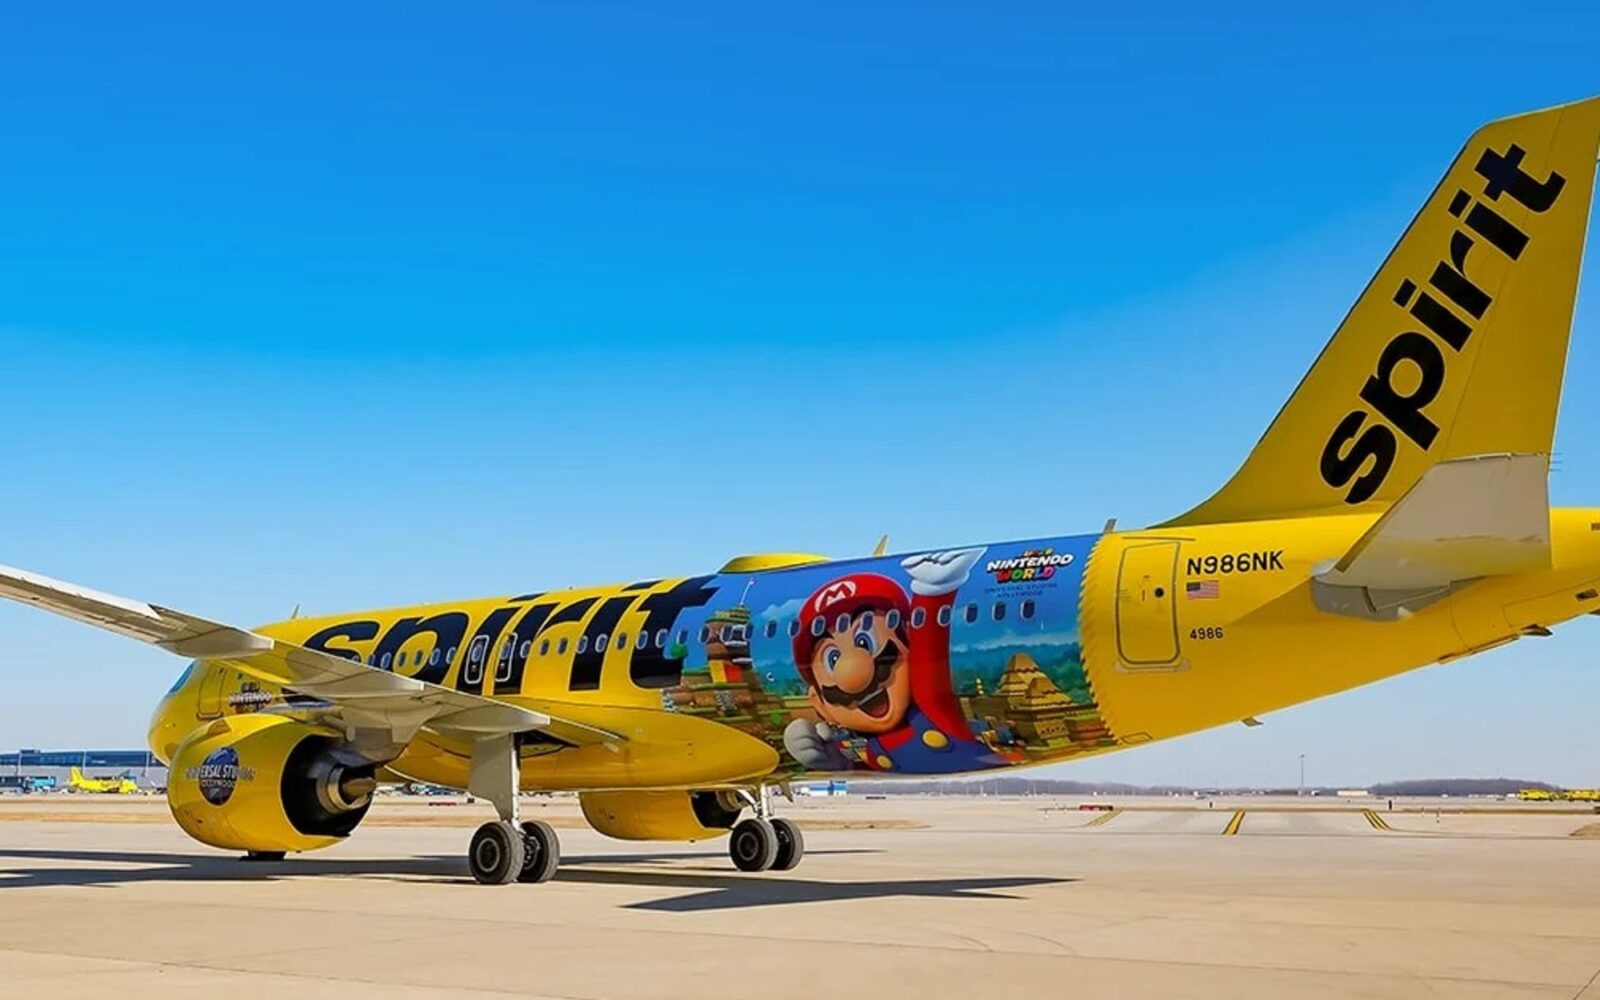 Airbus airplane decked in Super Nintendo Environment livery